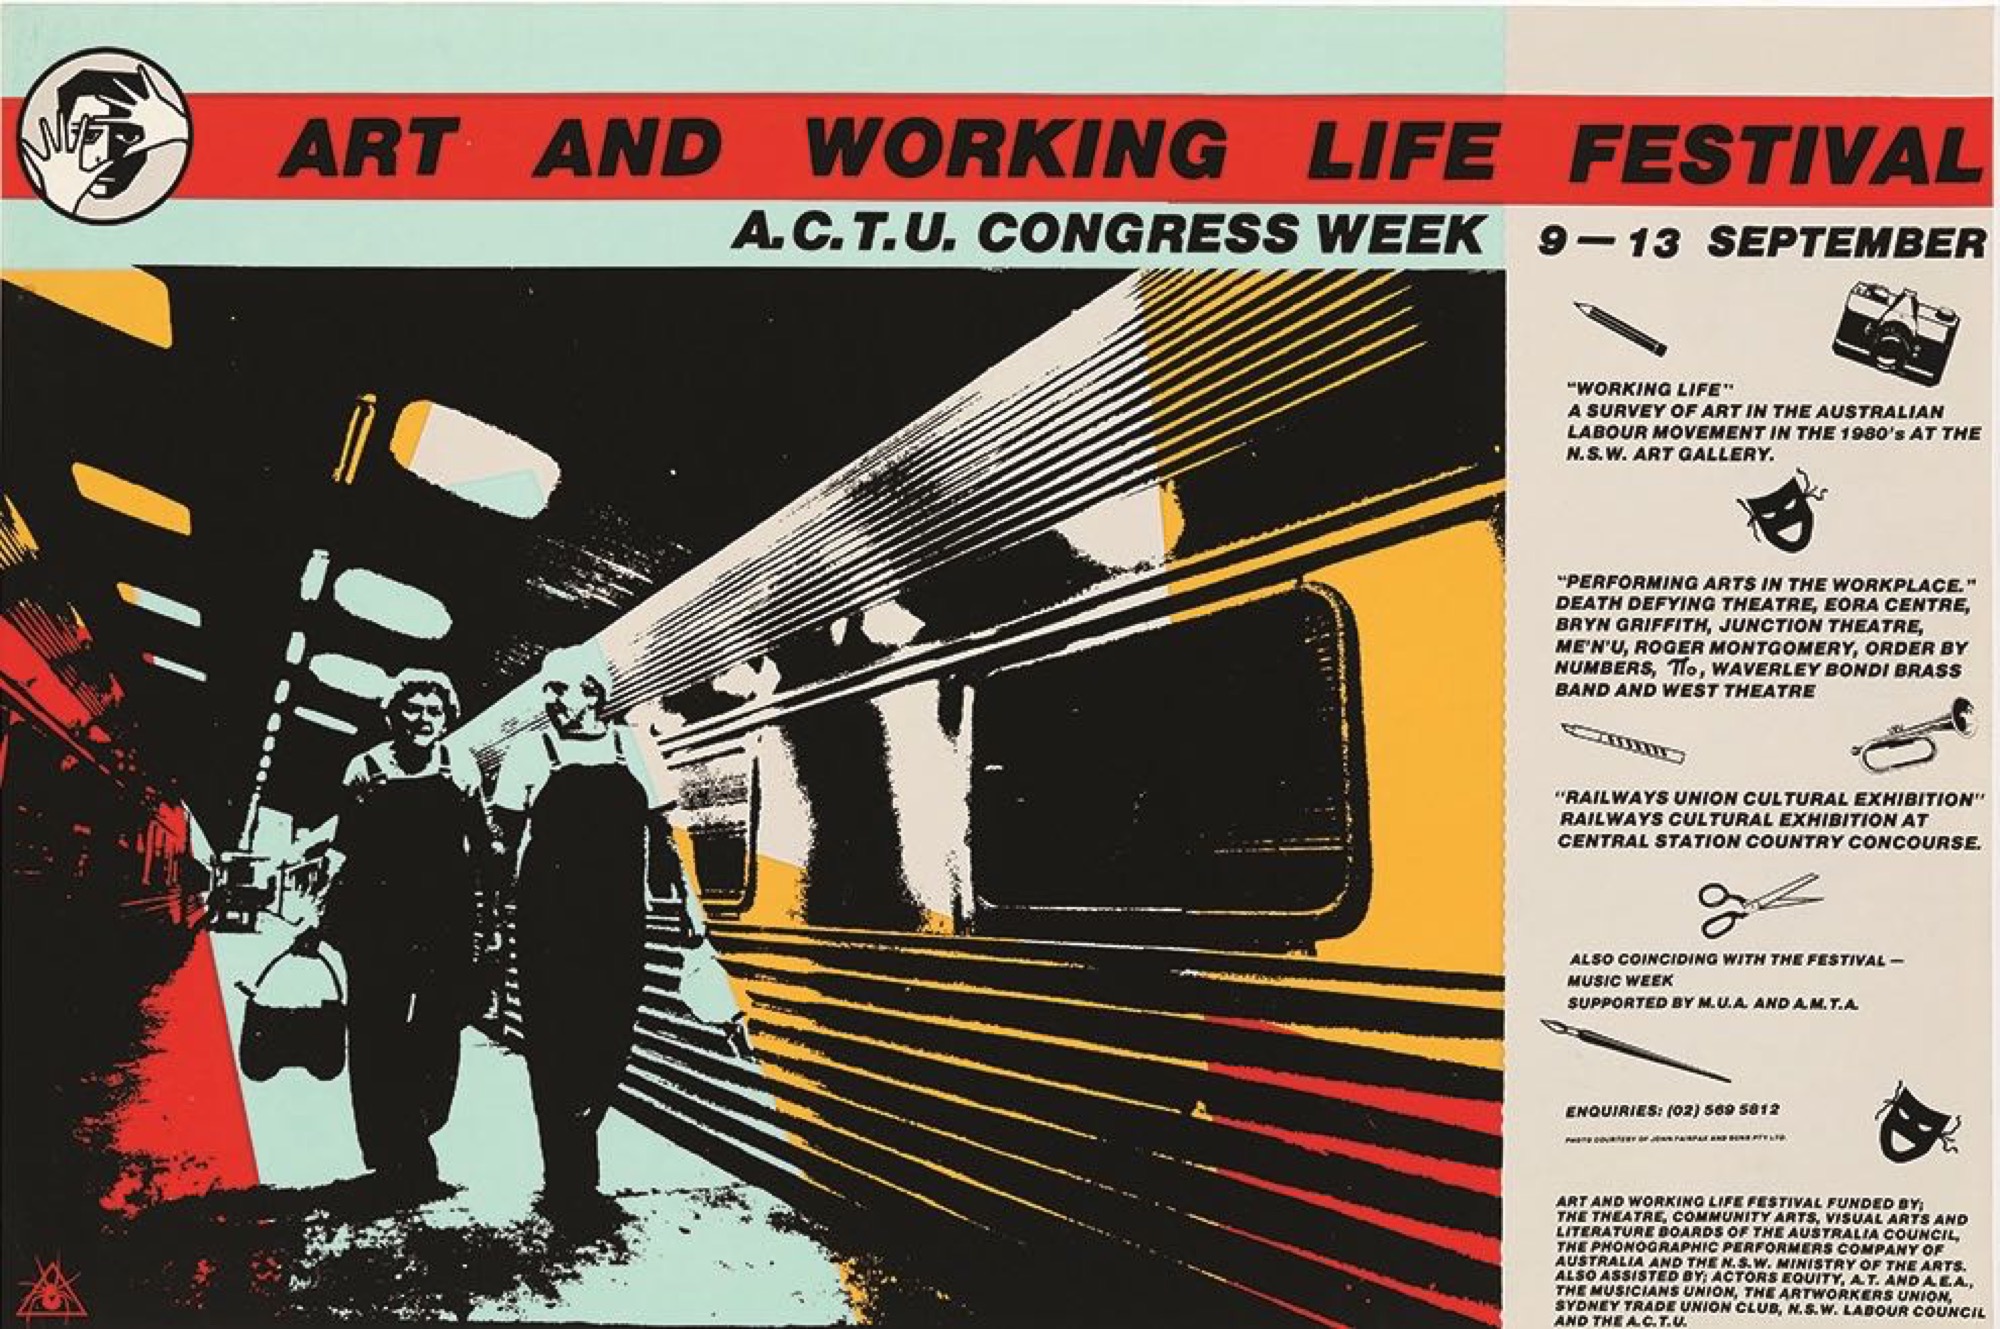 Alison Alder and Leonie Lane, <em>Art and Working Life Festival,</em> 1985, Screen print on paper. Collection of Ann Stephen. Image courtesy of The Ian Potter Museum of Art.